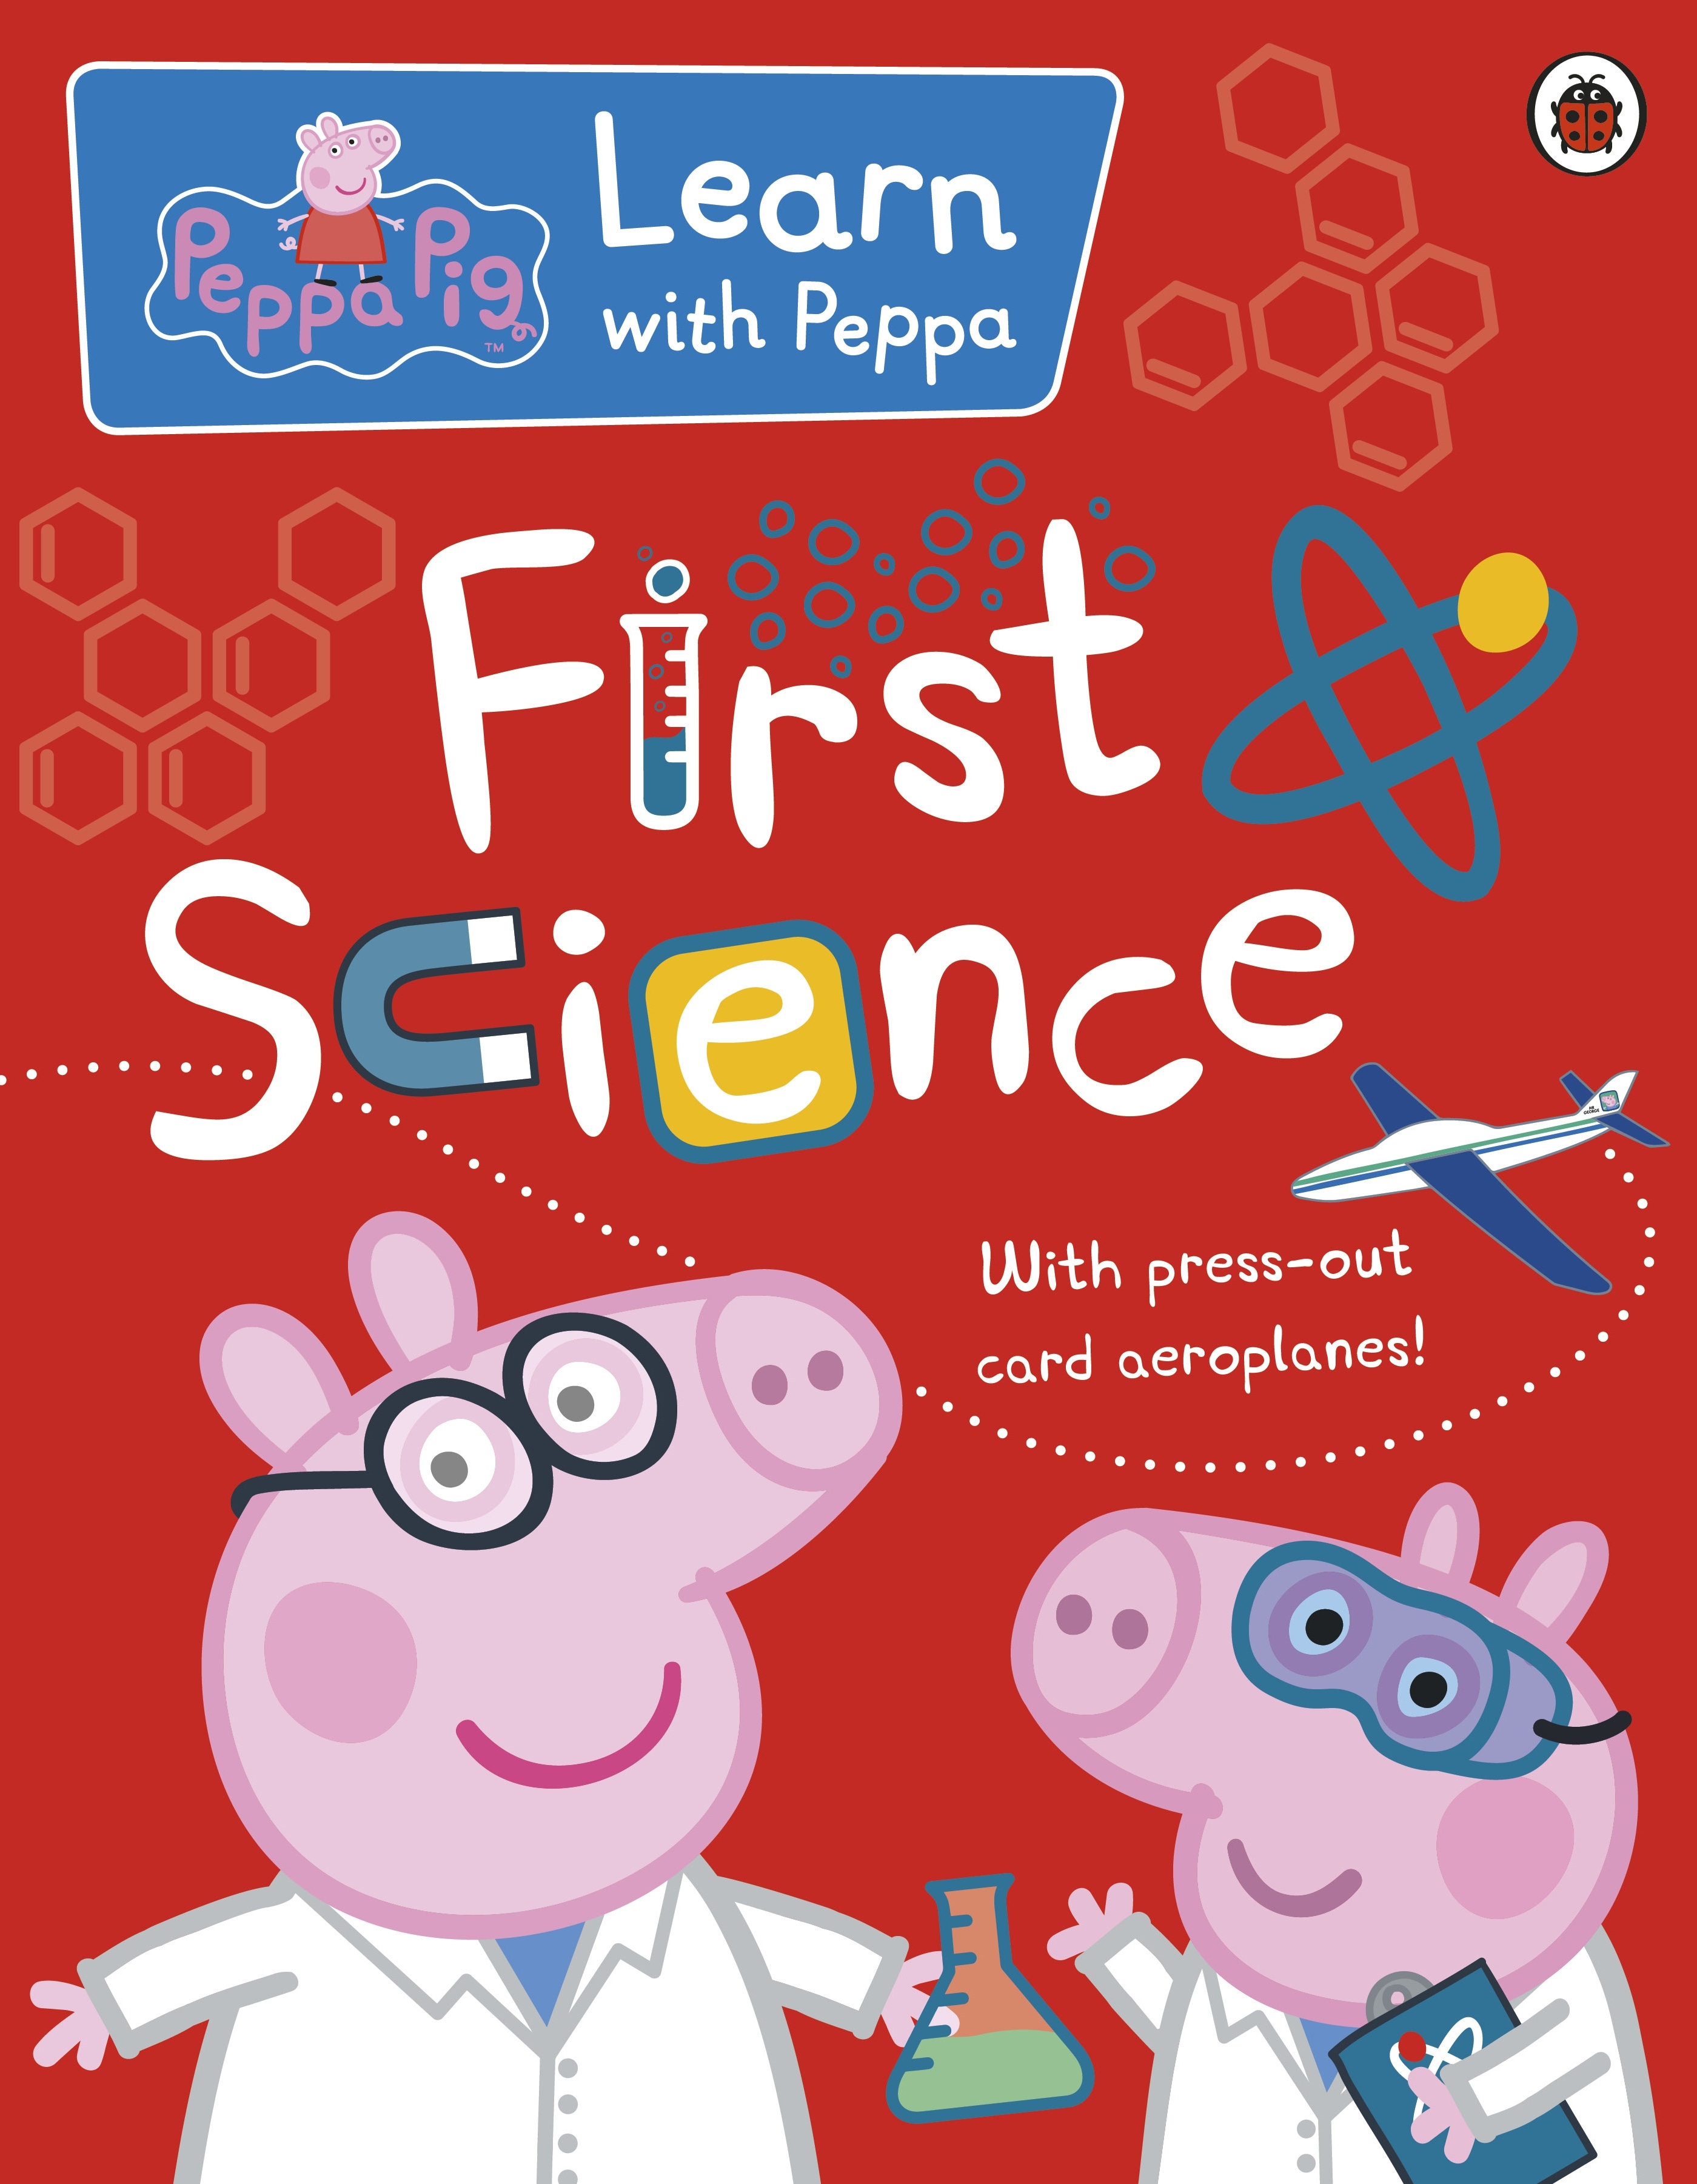 Book “Peppa: First Science” by Peppa Pig — July 27, 2017